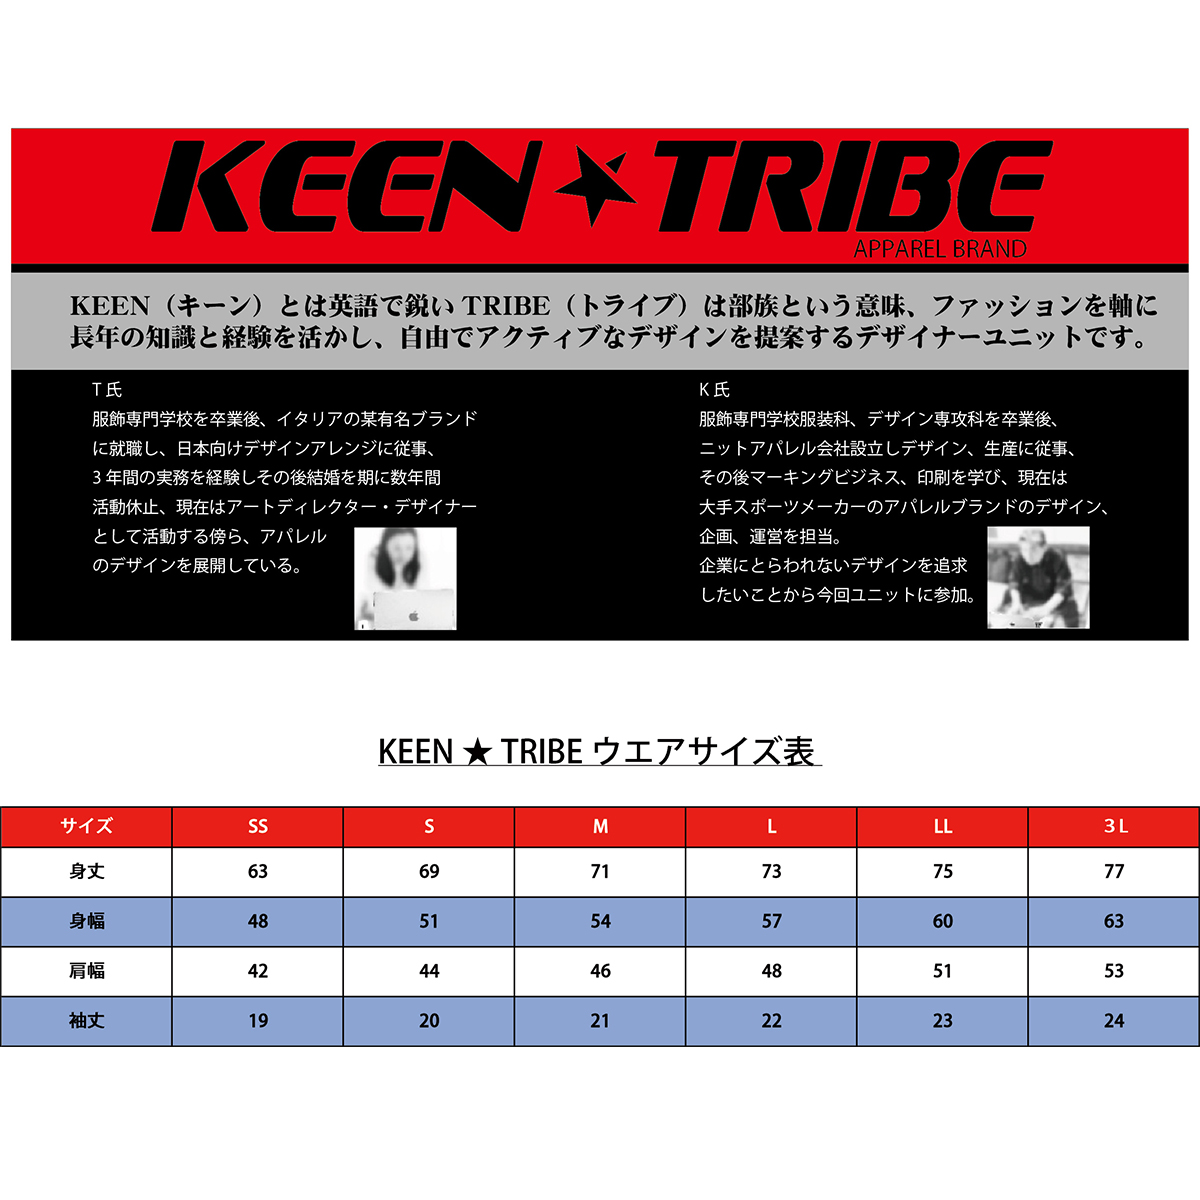 KEEN ★ TRIBE　KT-39(受注生産)